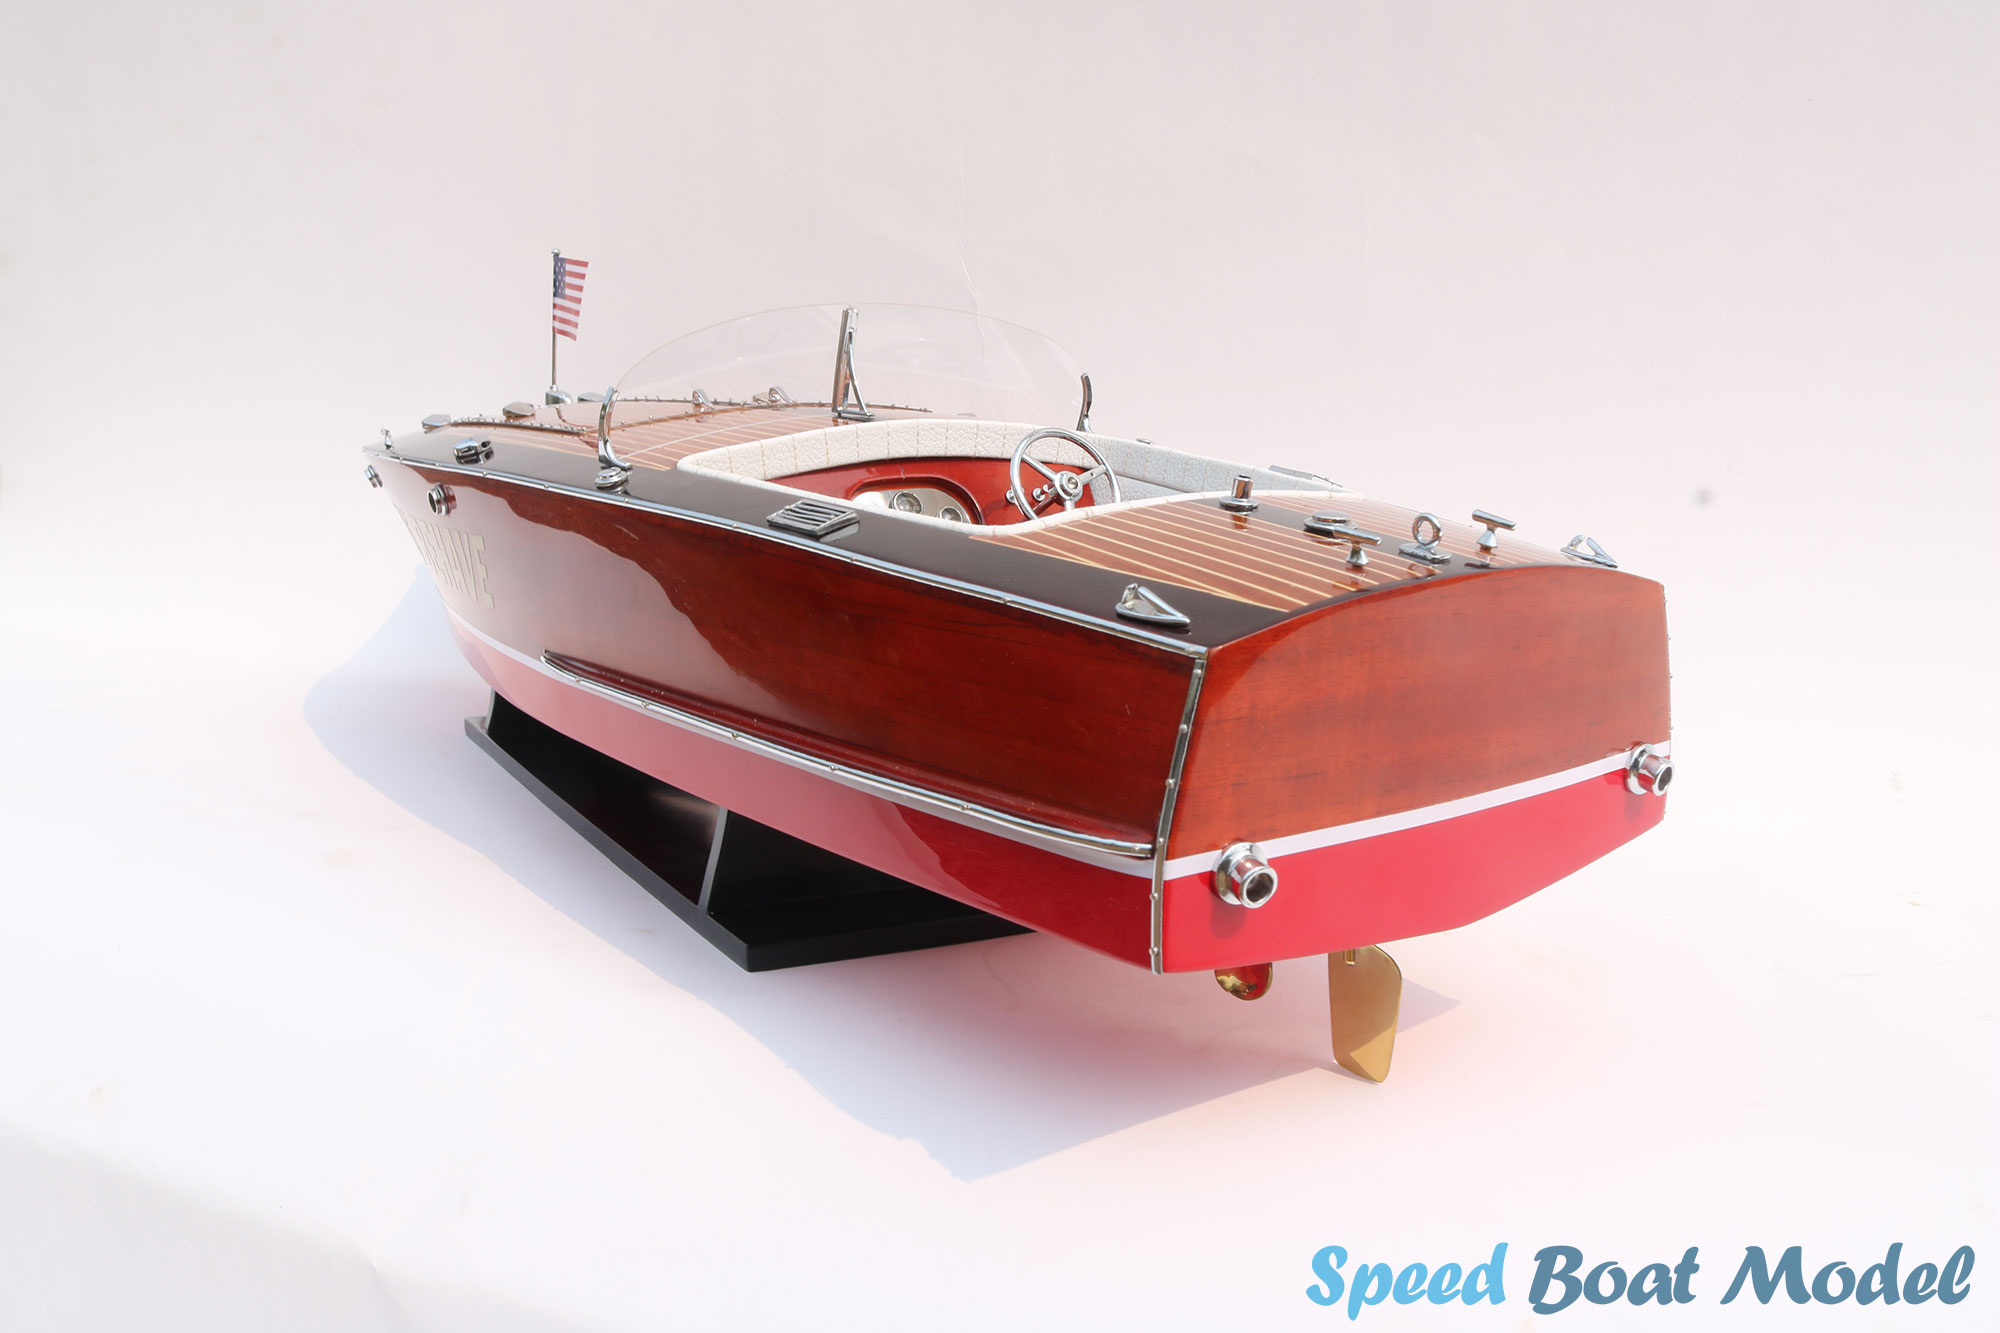 Miss Behave Classic Speed Boat Model 31.4"